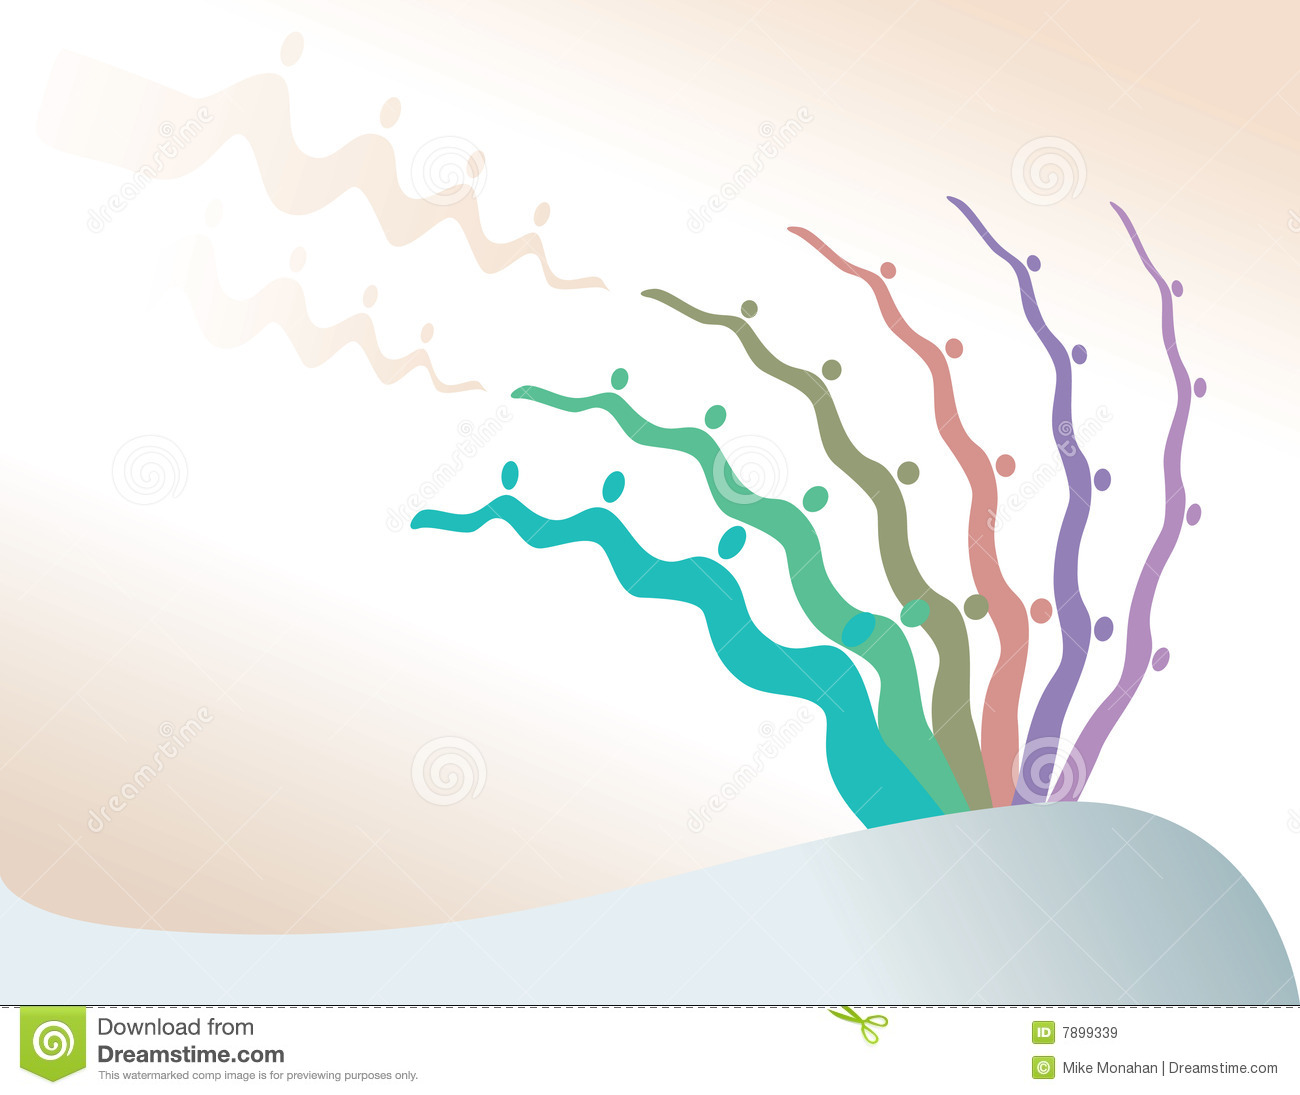 Background Of Colorful Wavy Lines On A Light Colored Background